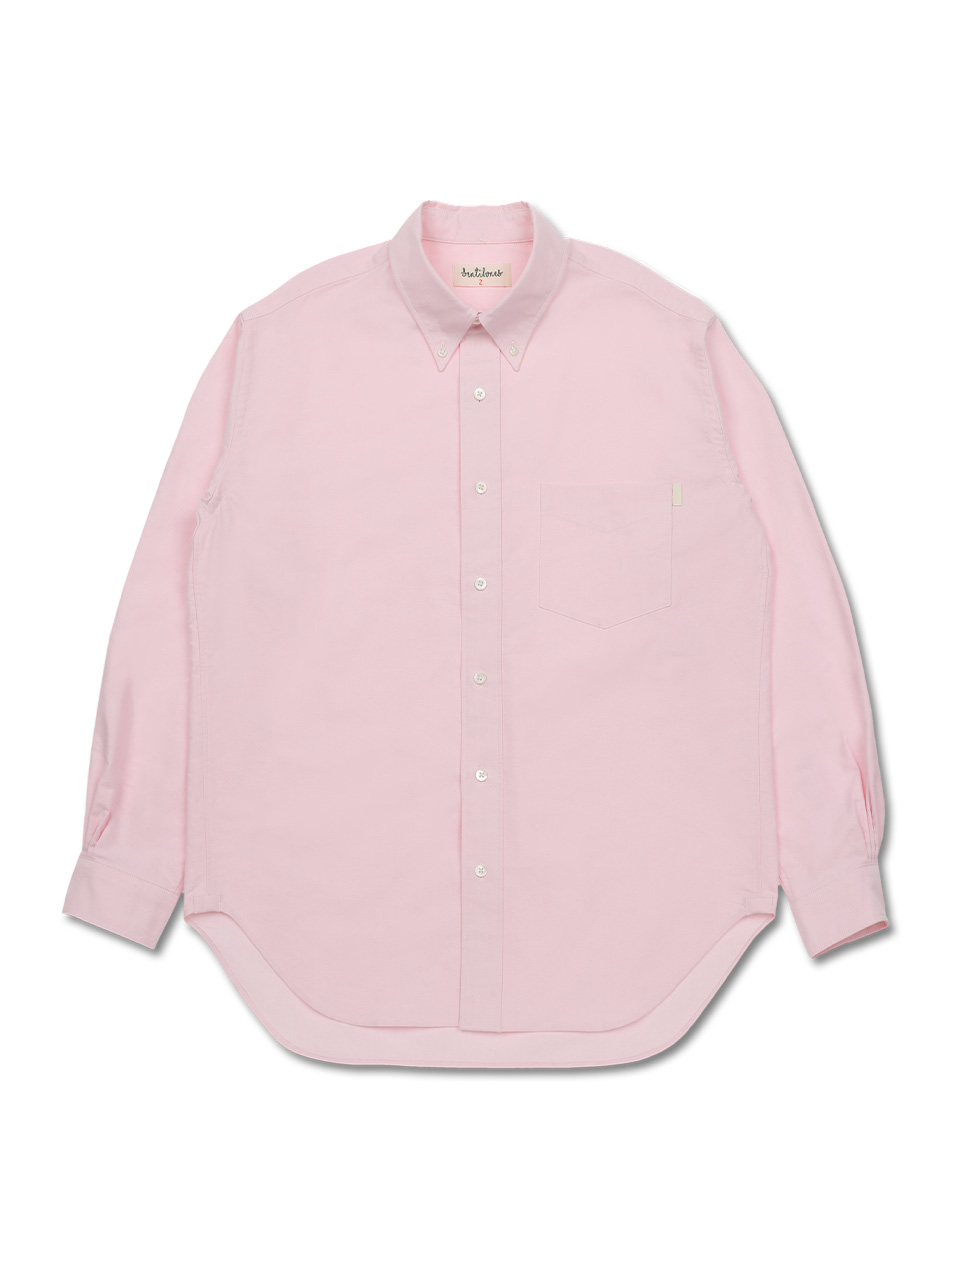 EASYGOING OXFORD SHIRTS - PINK